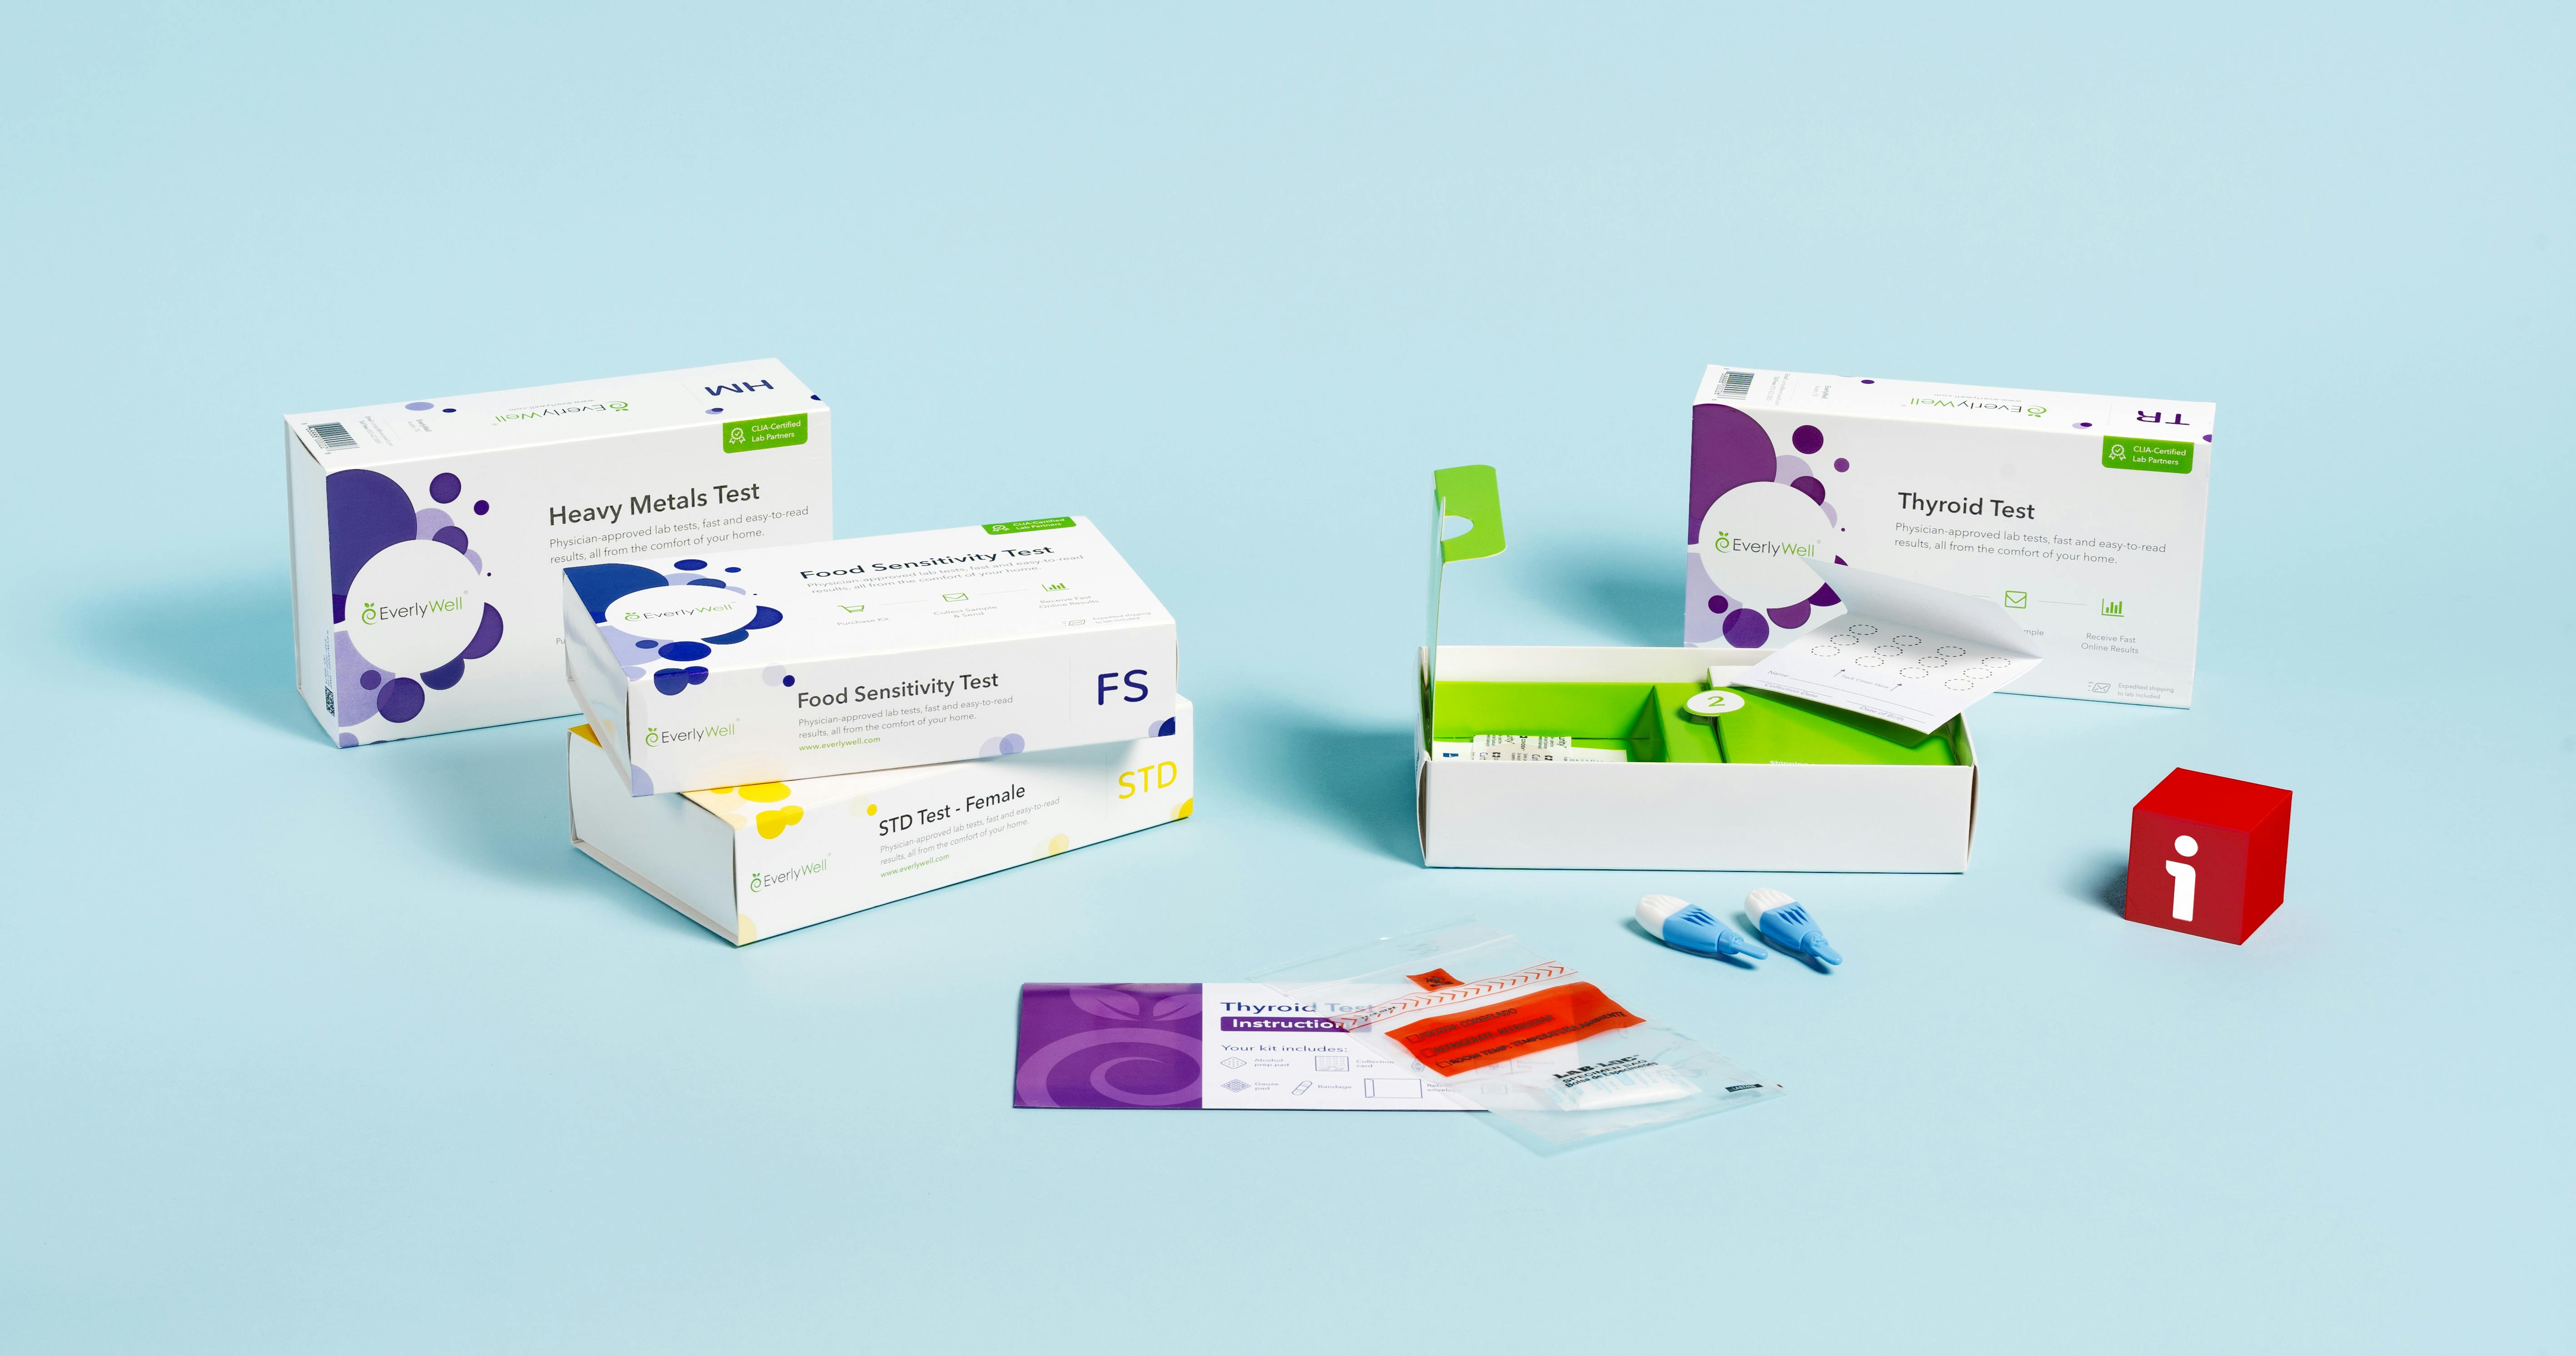 Home Cortisol Blood Test – Official Rapid Tests